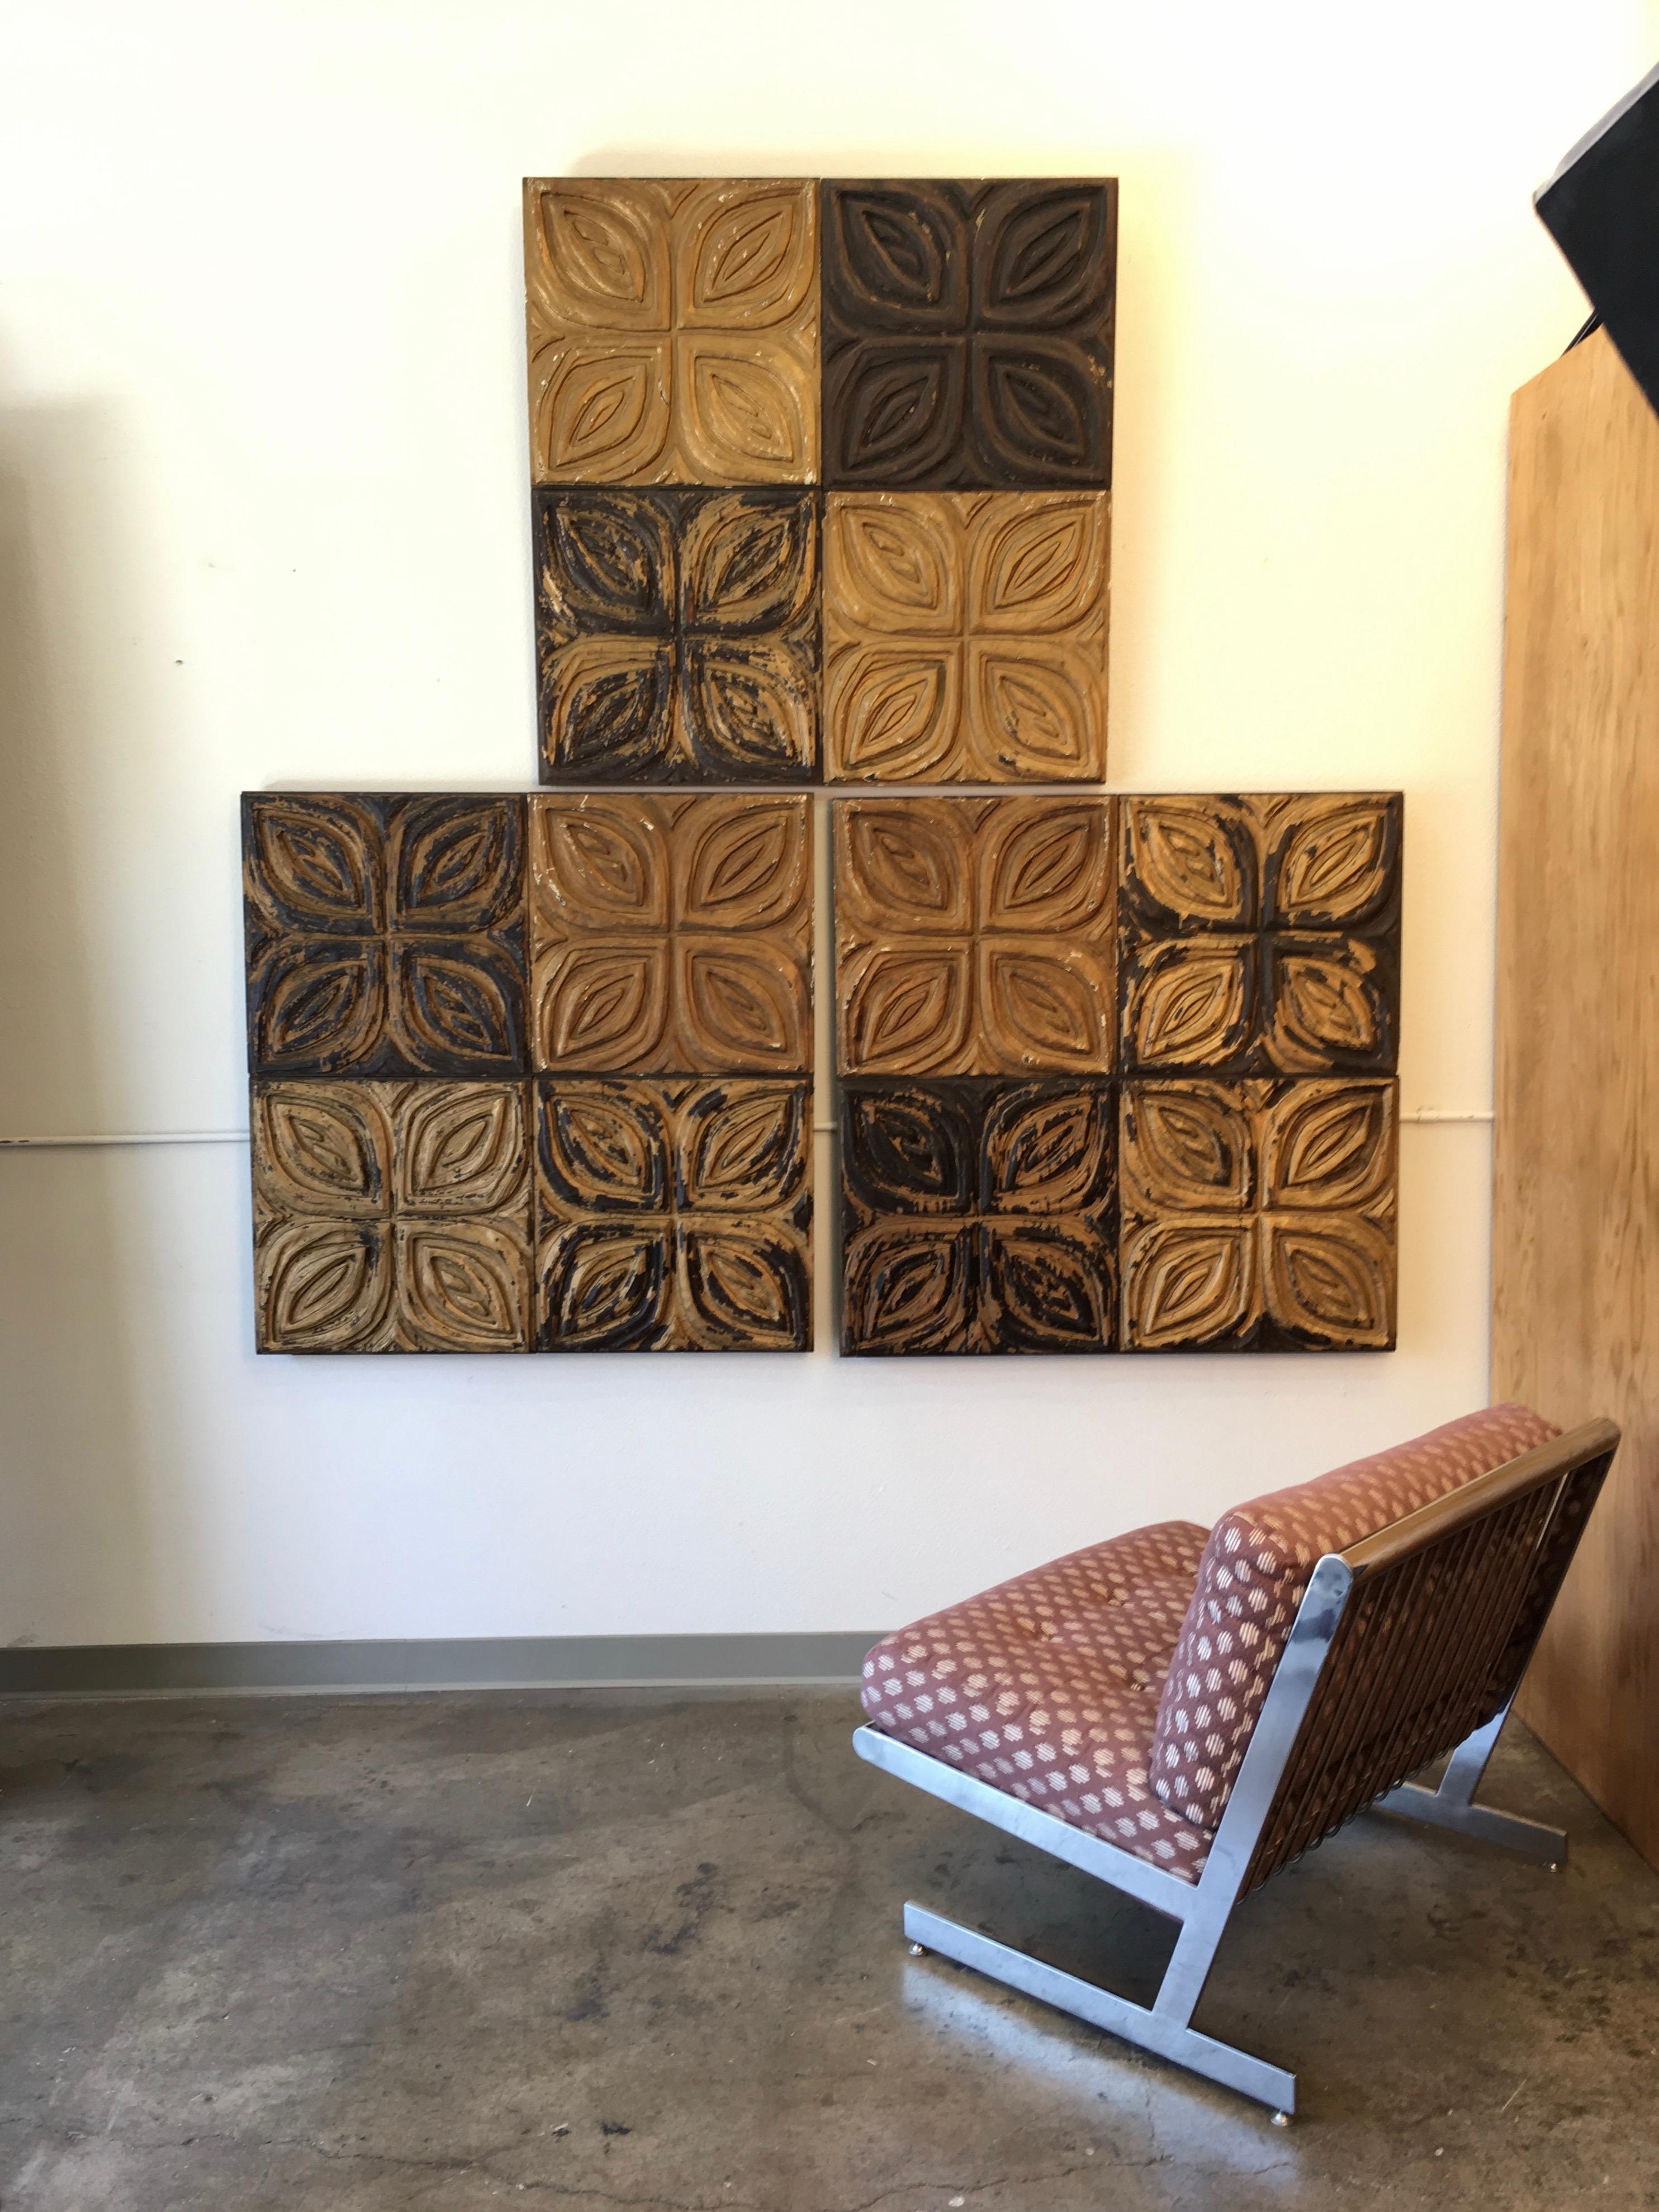 Carved redwood wall panels or sculptures by Evelyn Ackerman for Panelcarve.